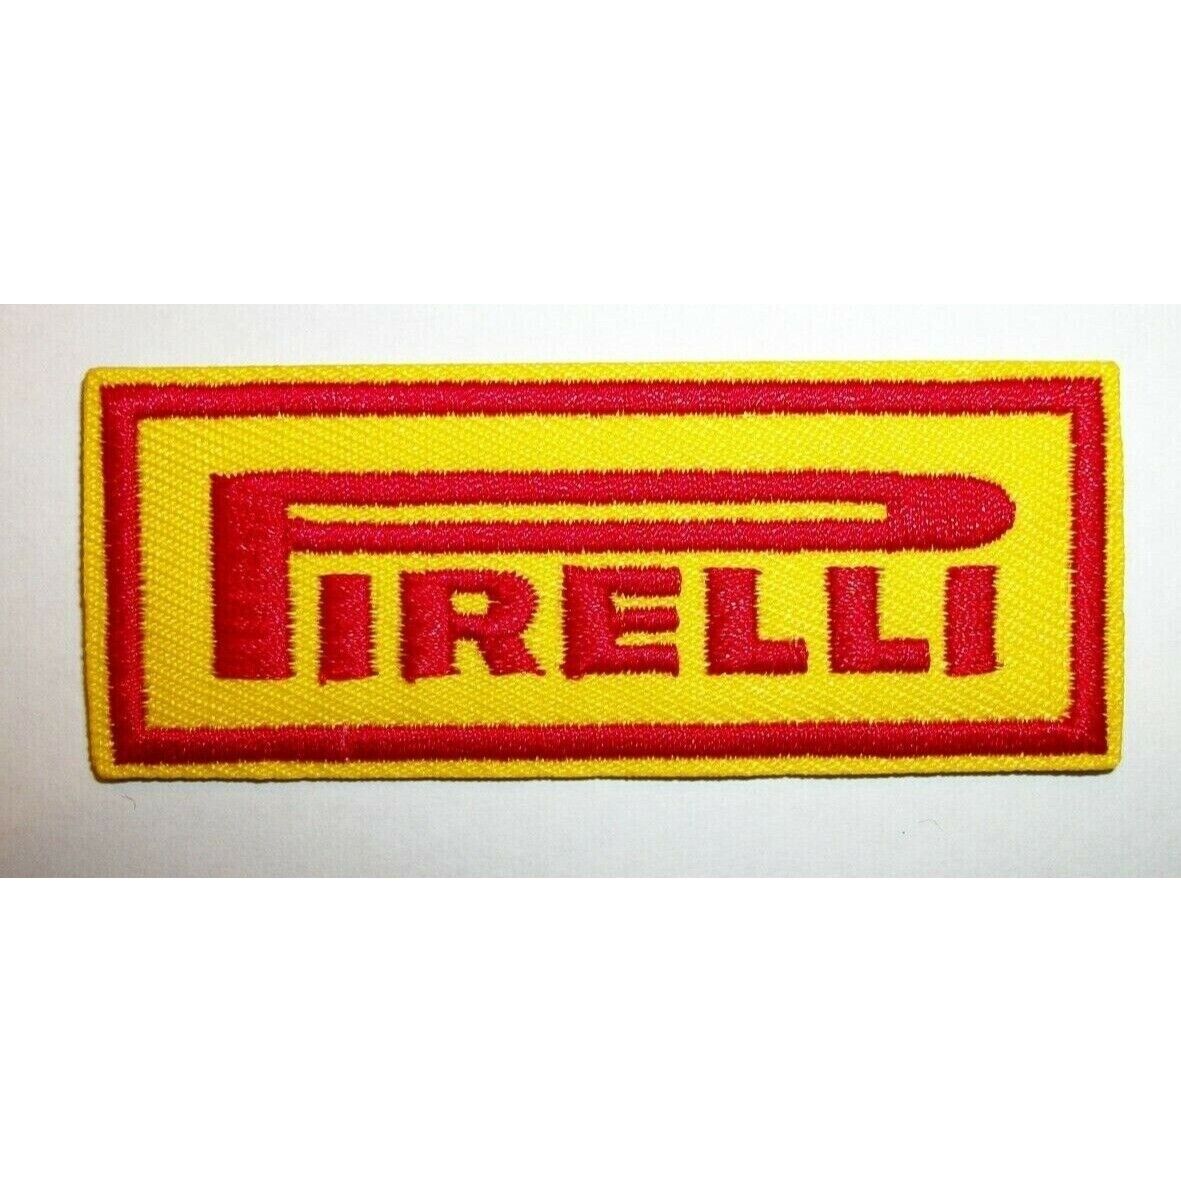 Pirelli Racing Tires~Embroidered Patch~Auto Racing~3\